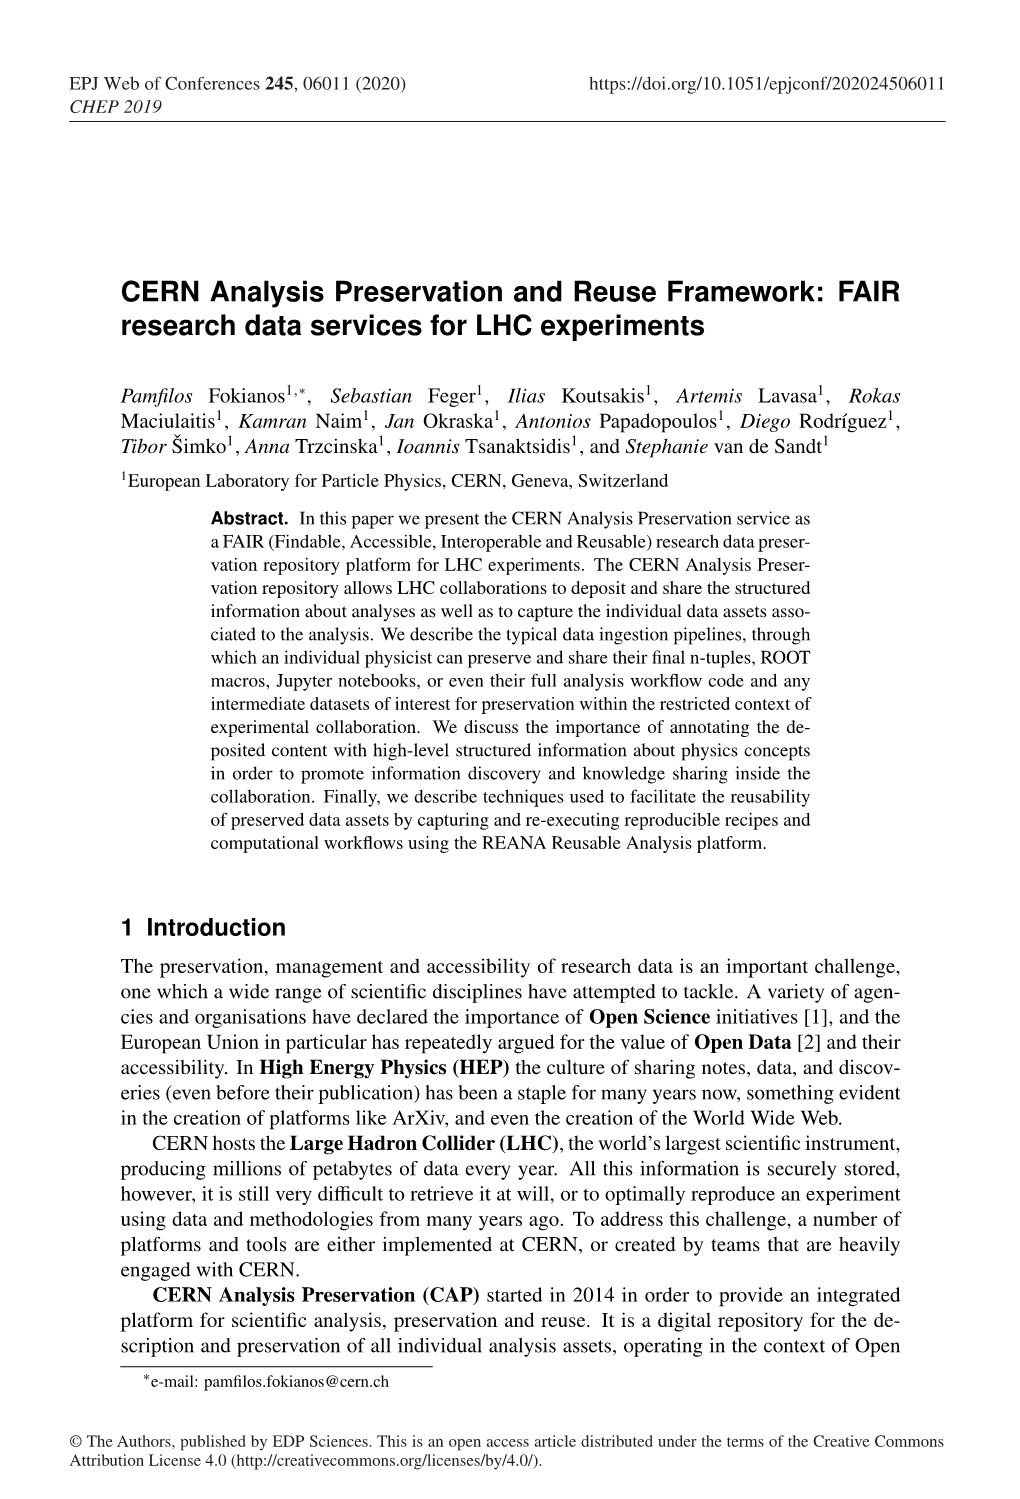 CERN Analysis Preservation and Reuse Framework: FAIR Research Data Services for LHC Experiments